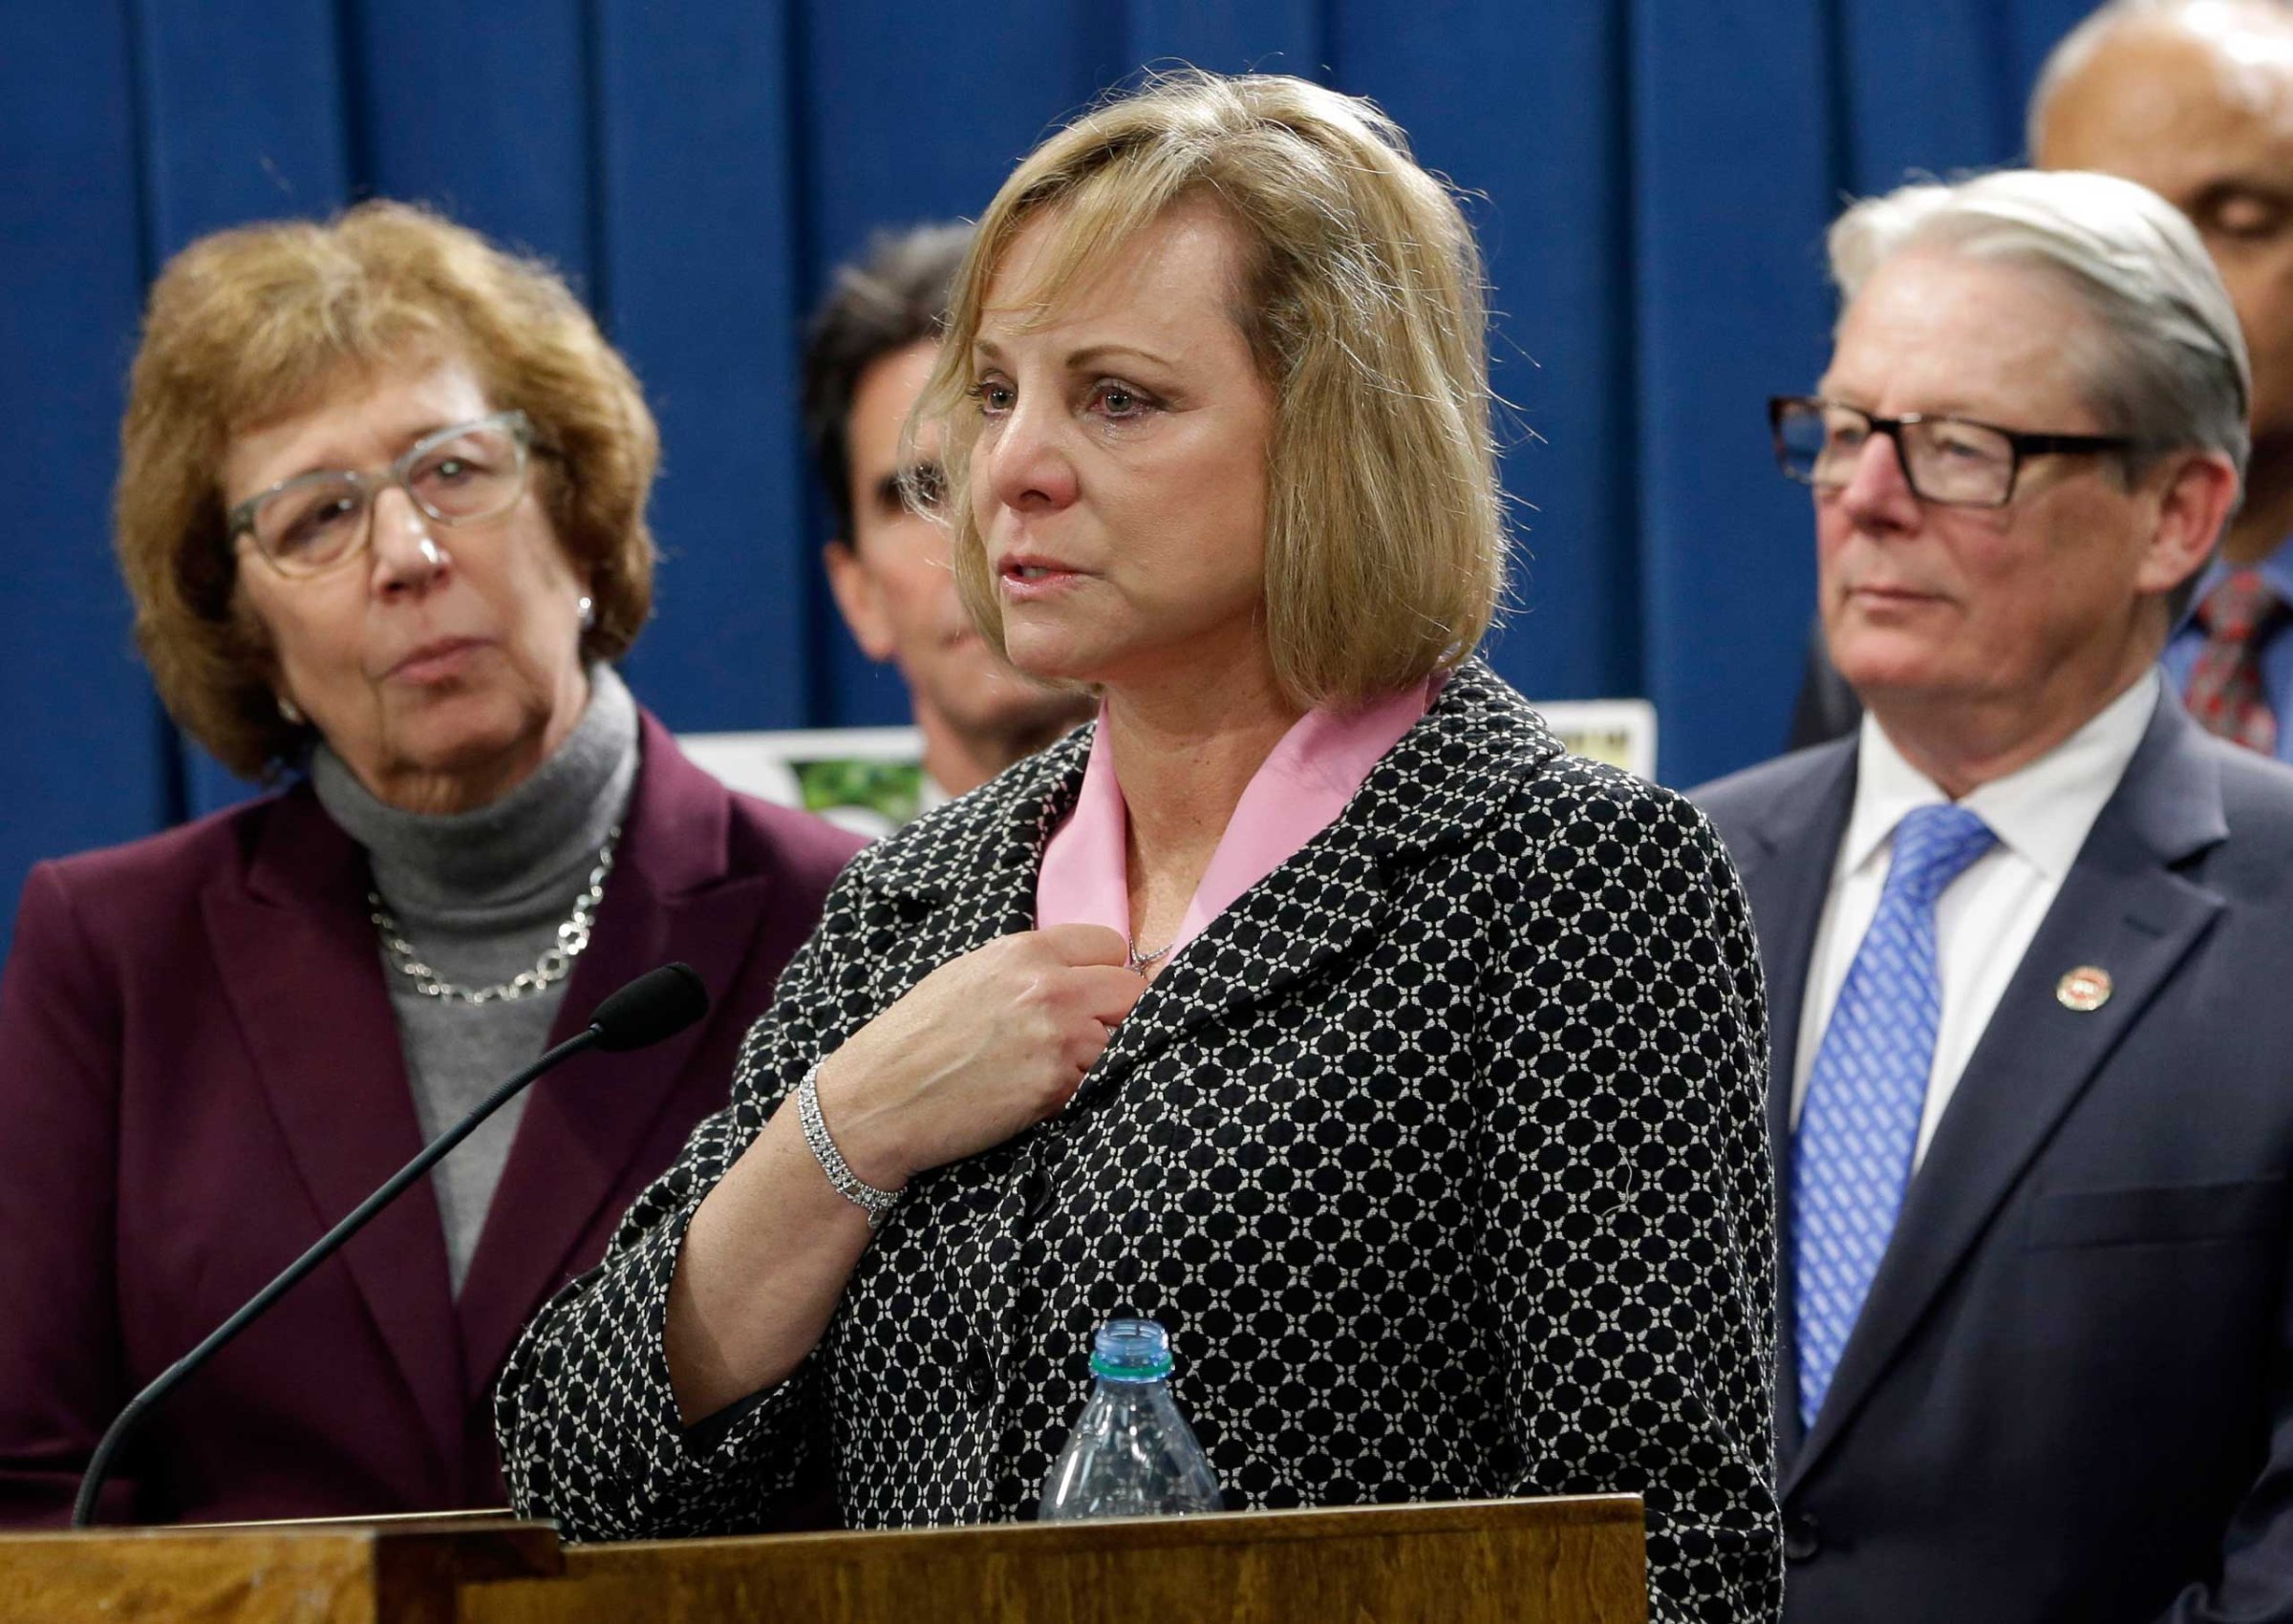 Debbie Ziegler, the mother of Brittany Maynard, speaks in support of proposed legislation allowing doctors to prescribe life-ending medication to terminally ill patients during a news conference at the Capitol, Jan. 21, 2015, in Sacramento, Calif.